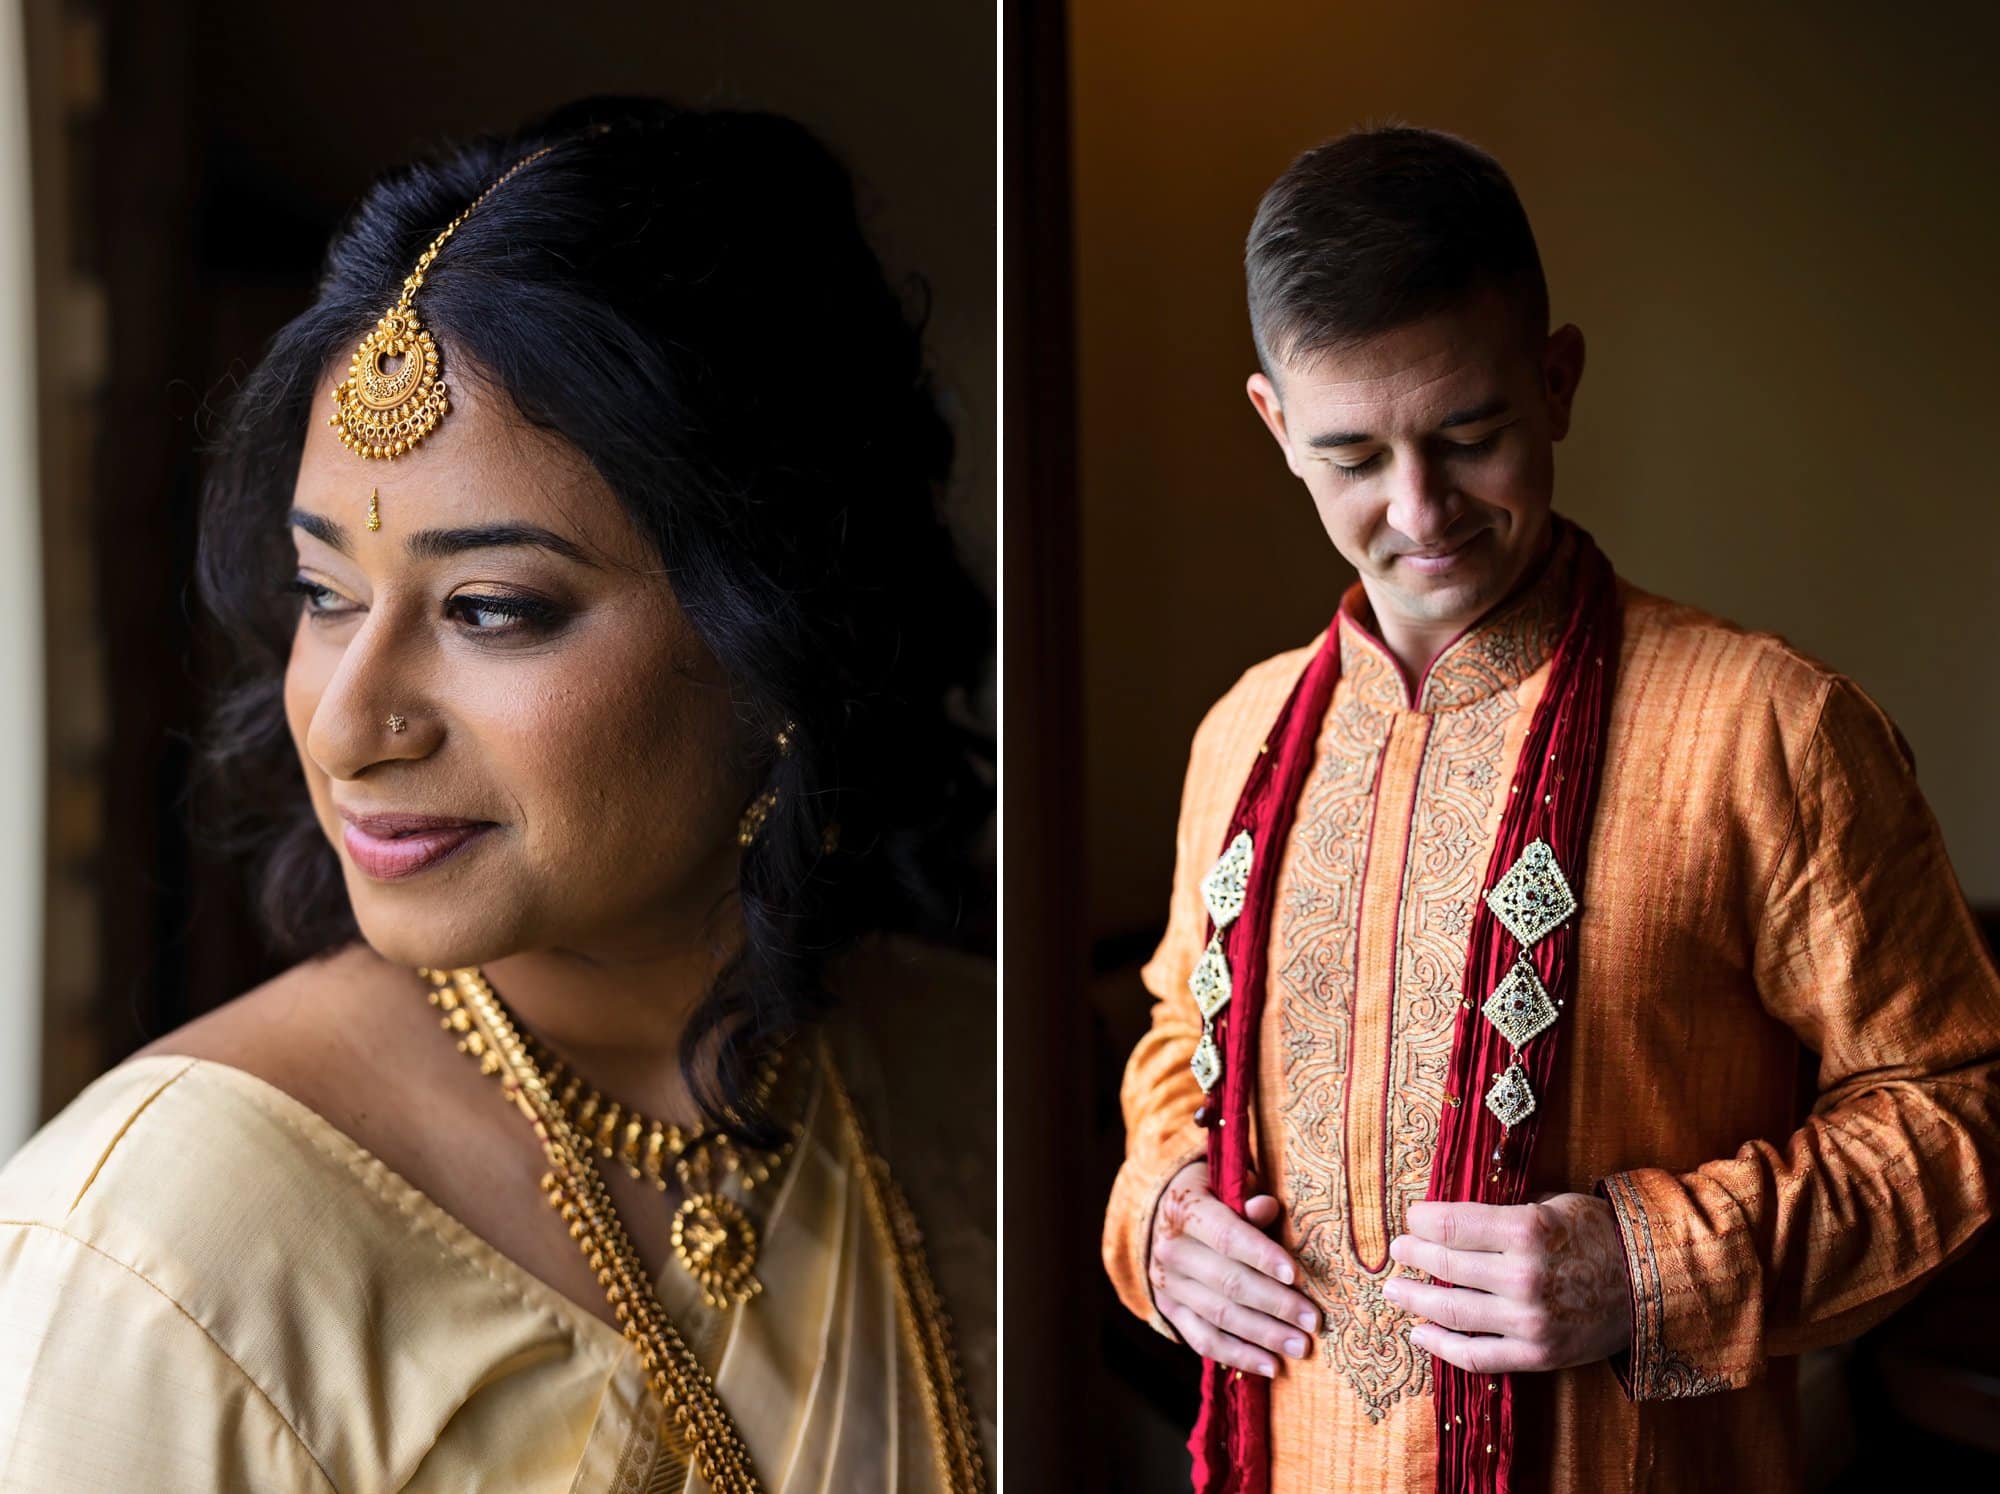 A bride and groom in traditional Indian wedding attire get ready for their ceremony at Glenn Oaks Country Club in Des Monies, Iowa.